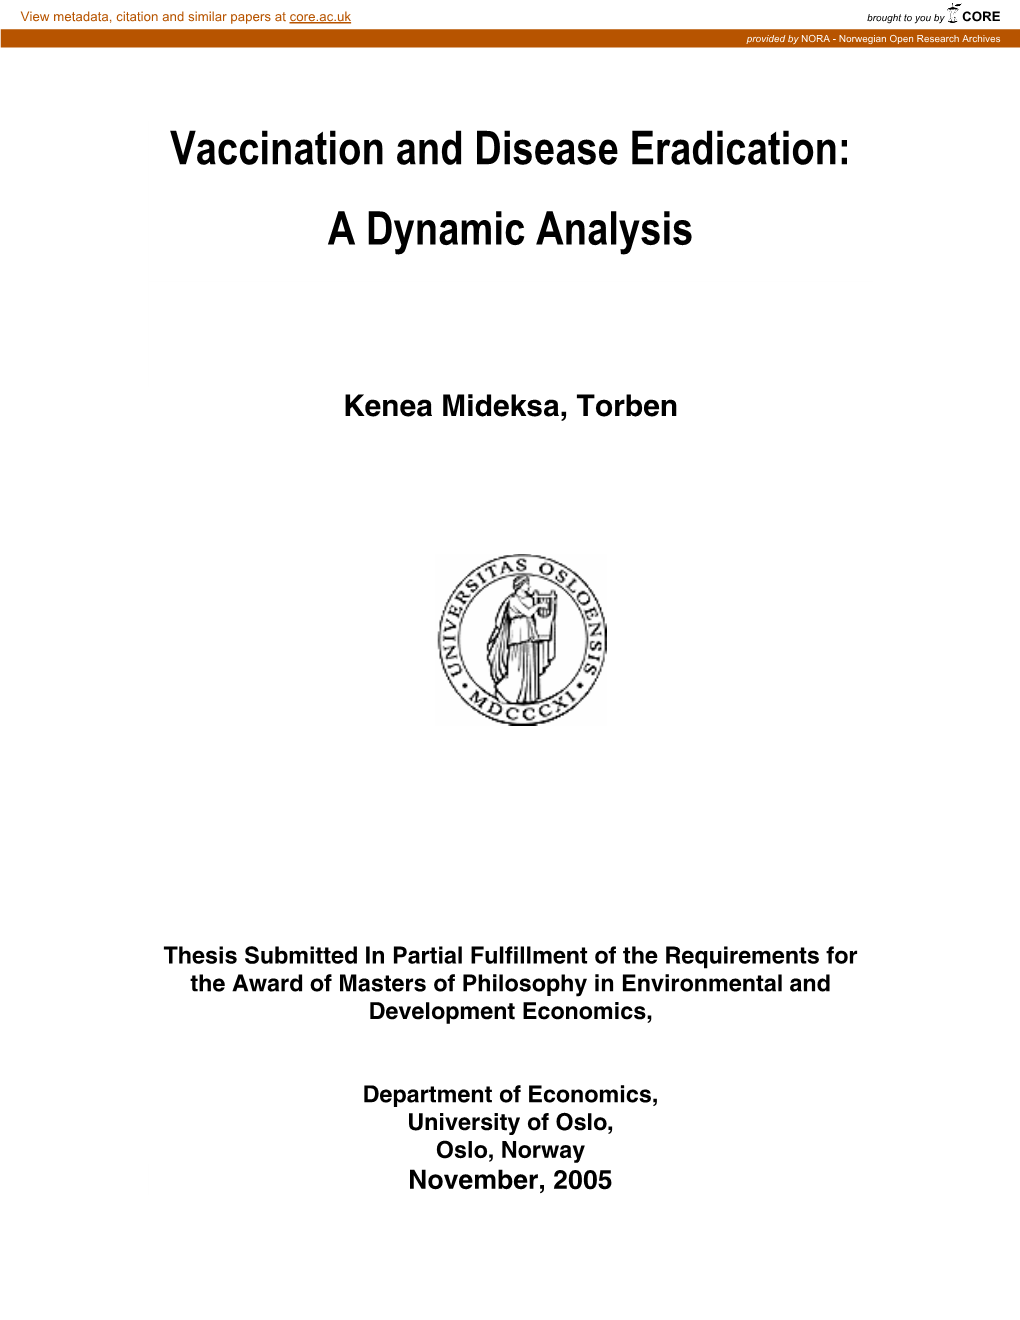 Vaccination and Disease Eradication: a Dynamic Analysis